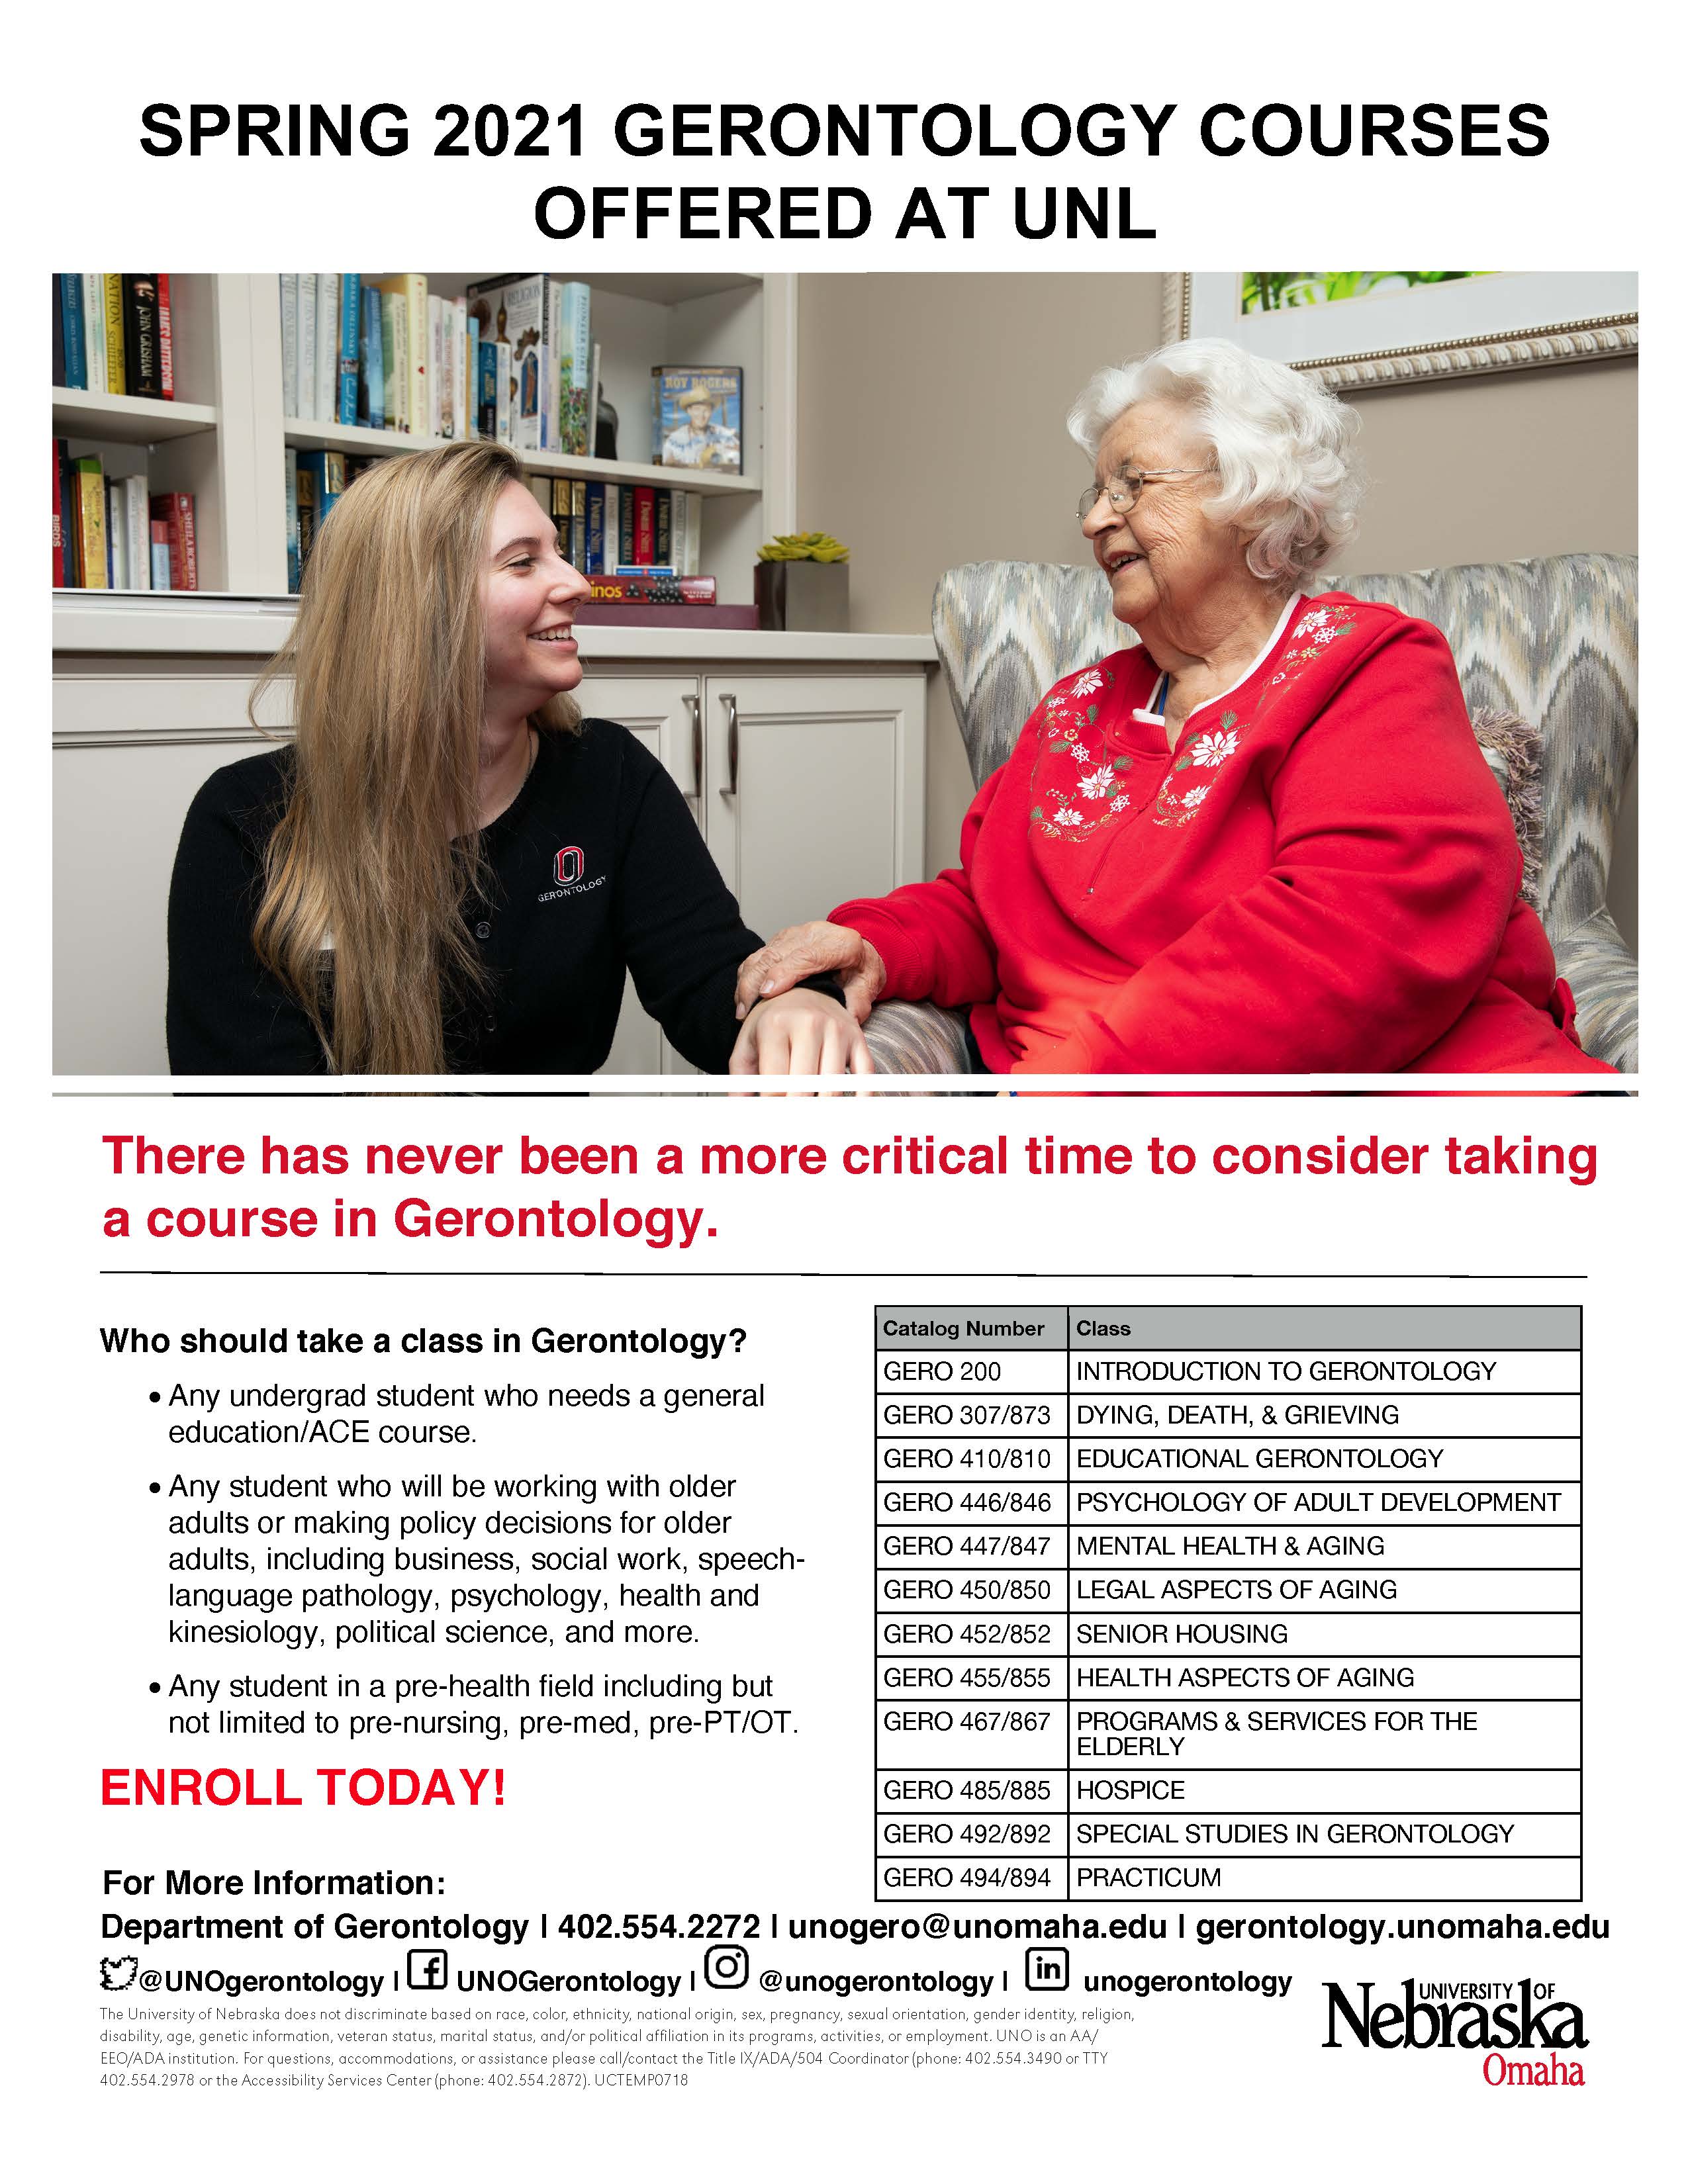 Spring 2021 Gerontology Courses Offered at UNL